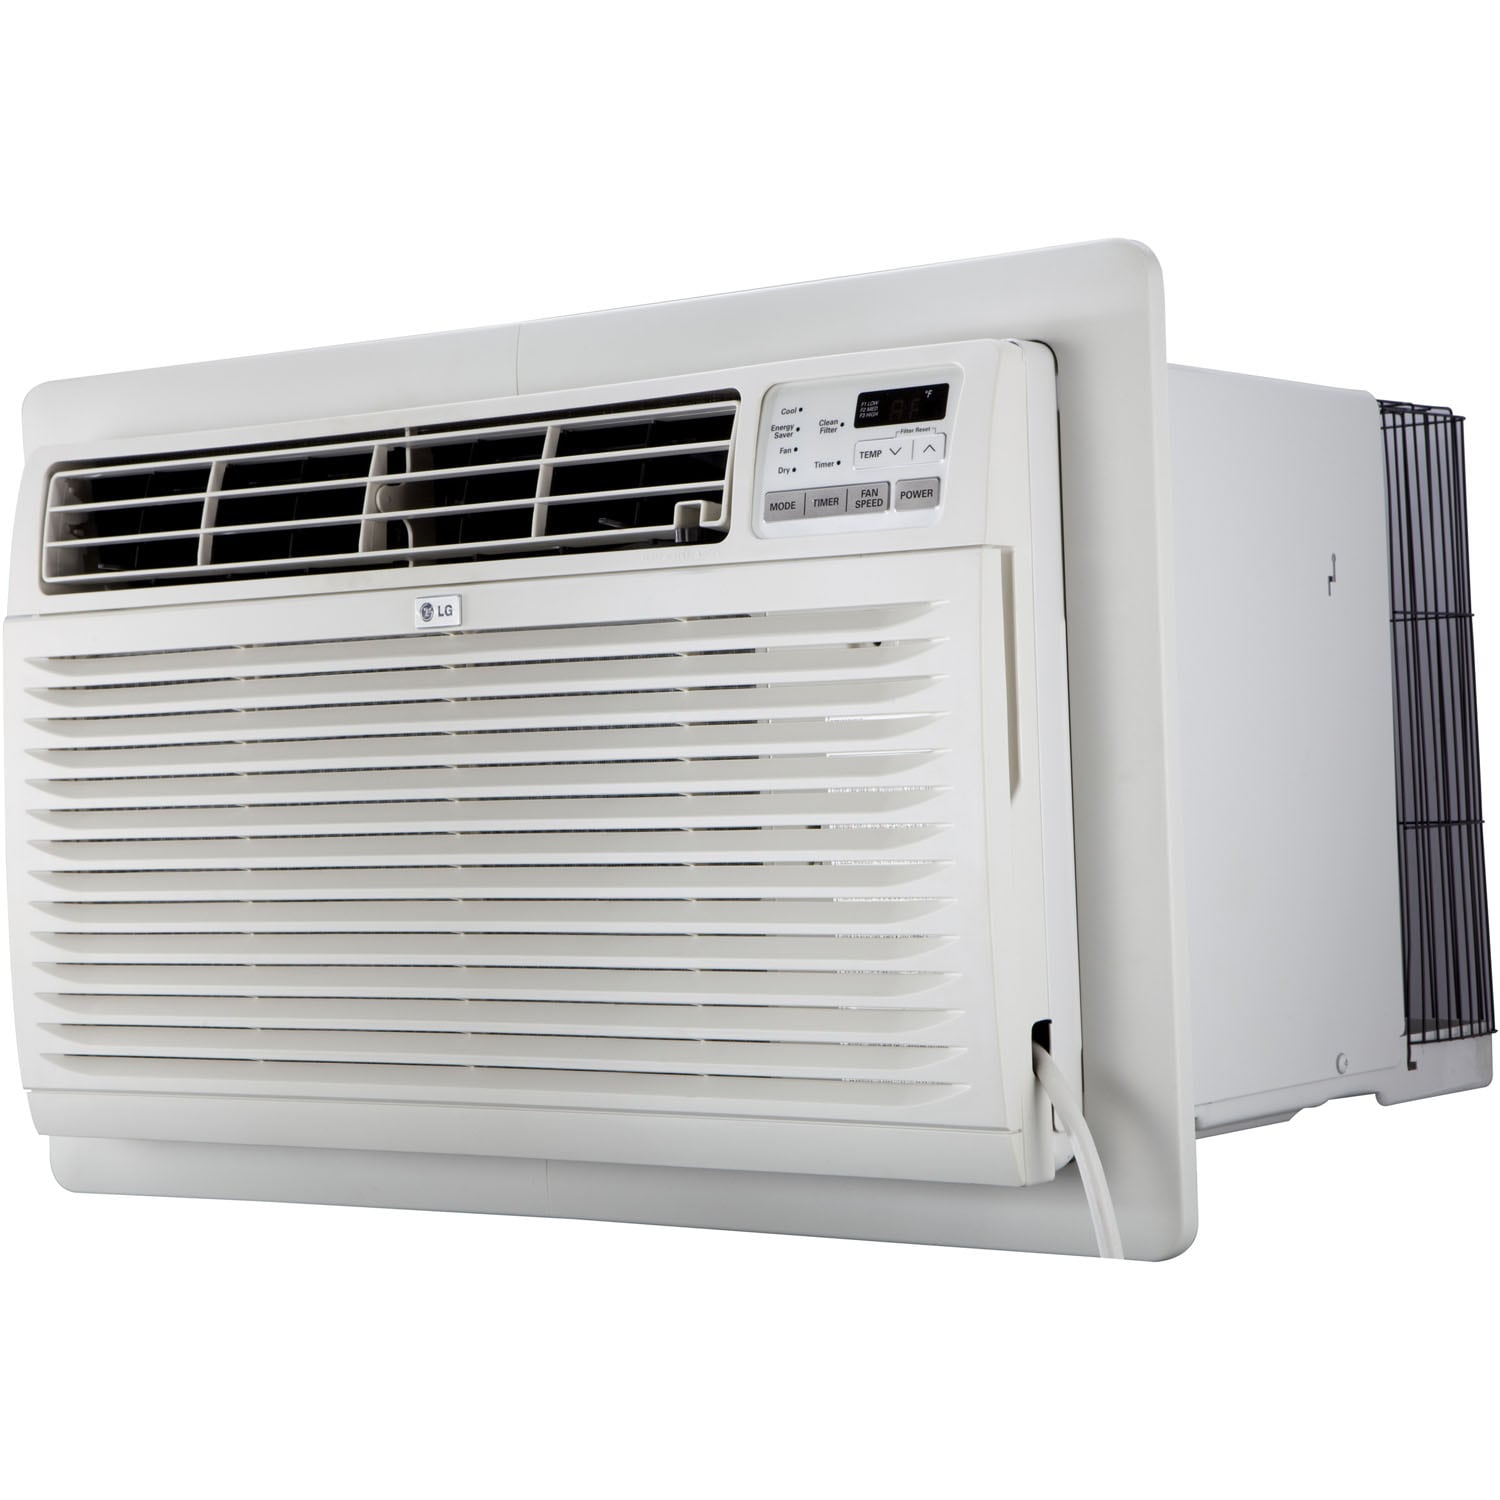 LG LG Wall Air Conditioner with Heat 520-sq ft 230-Volt Air Conditioner Heater Included in the Wall Air Conditioners department at Lowes.com